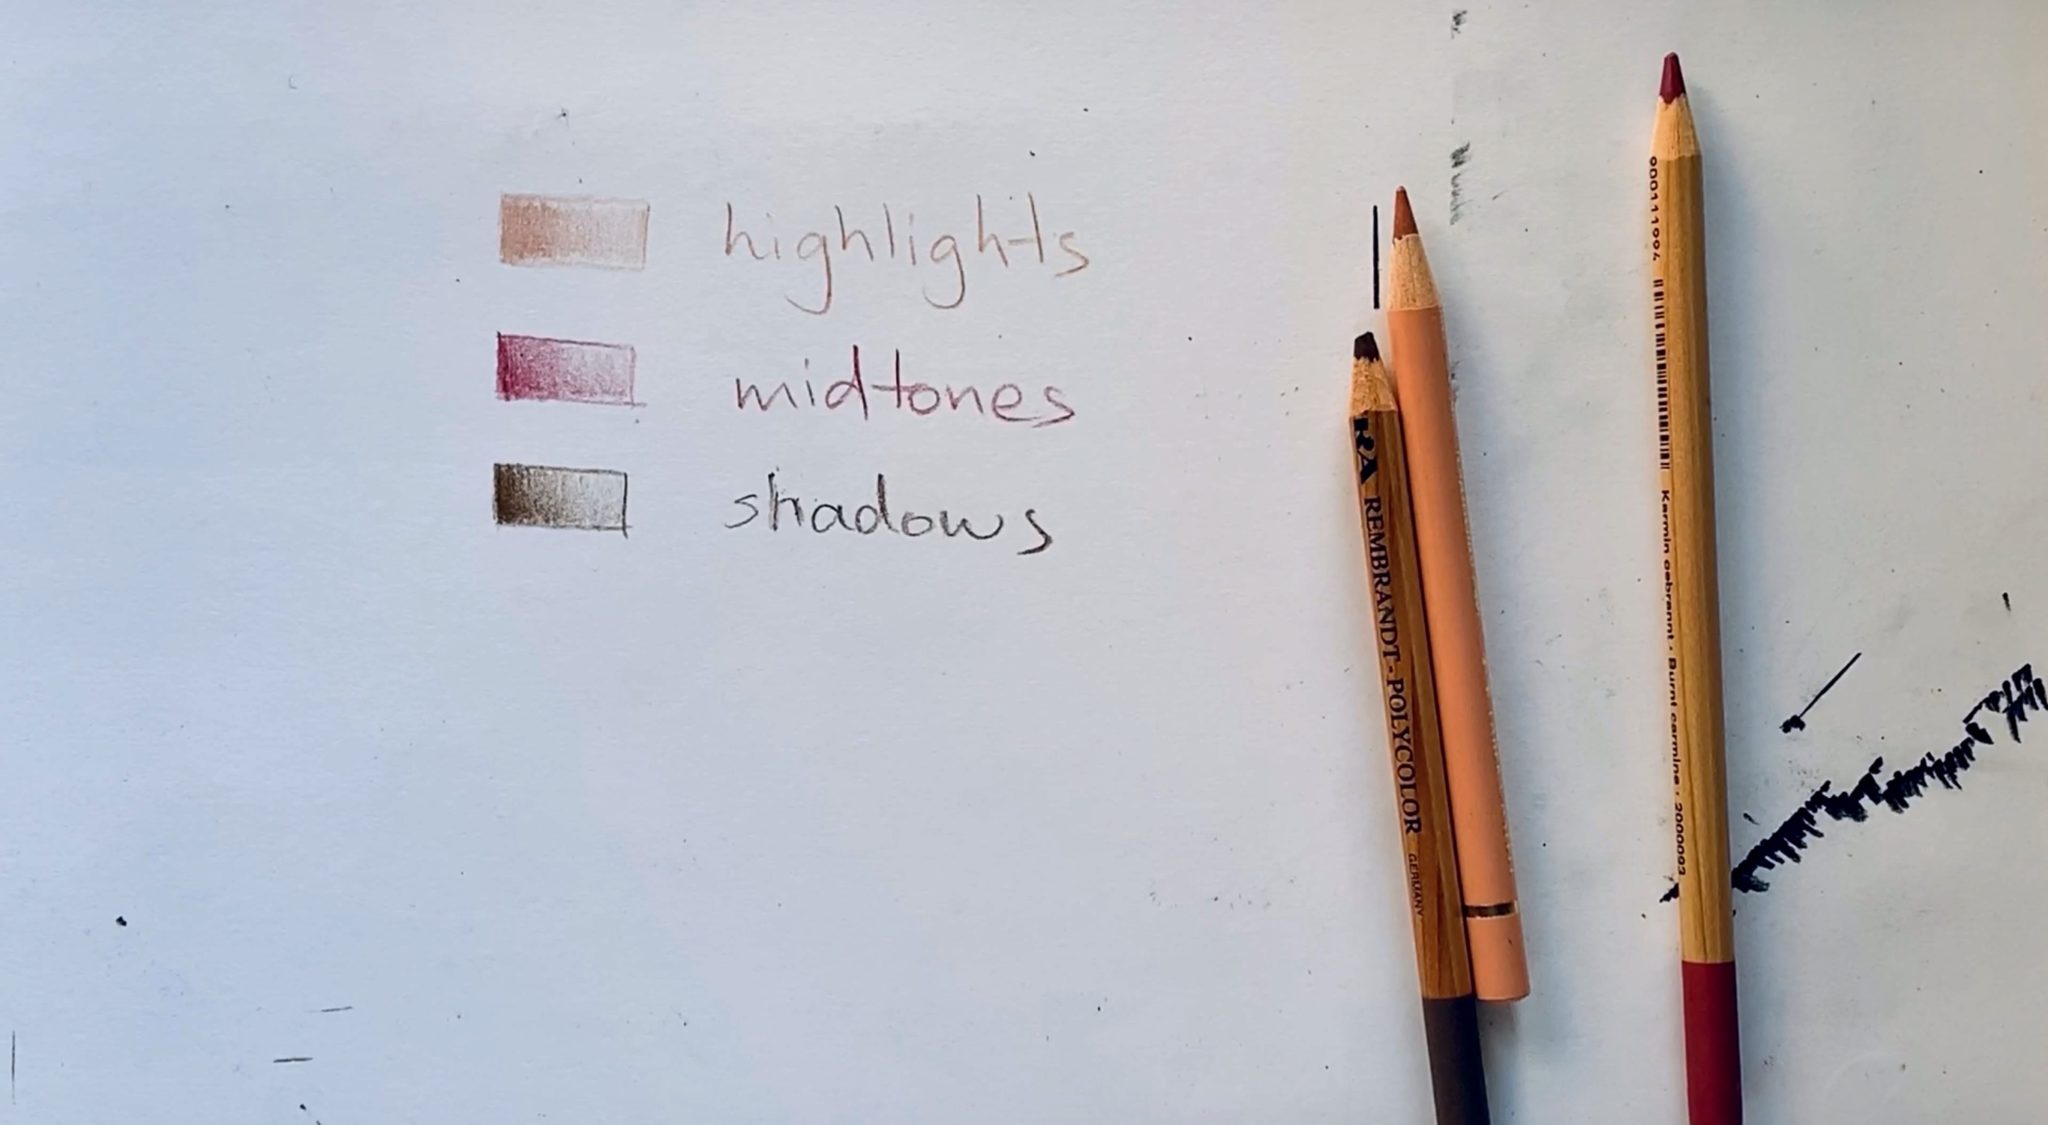 How to Make Skin Colour by Mixing Two Pencil Colours  